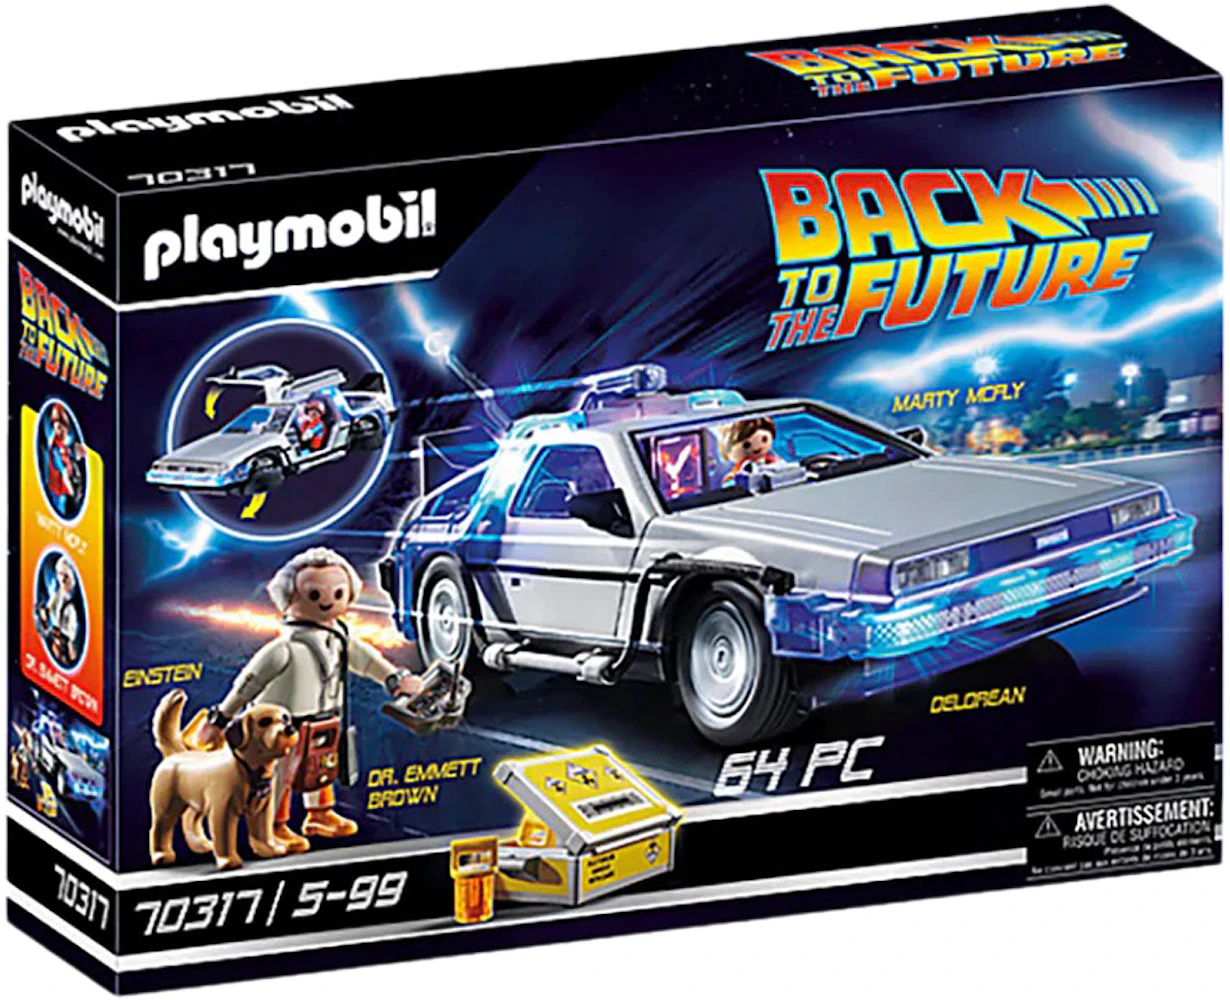 Playmobil® - Back to the Future - 70576 Adventskalender Back to the Future  III